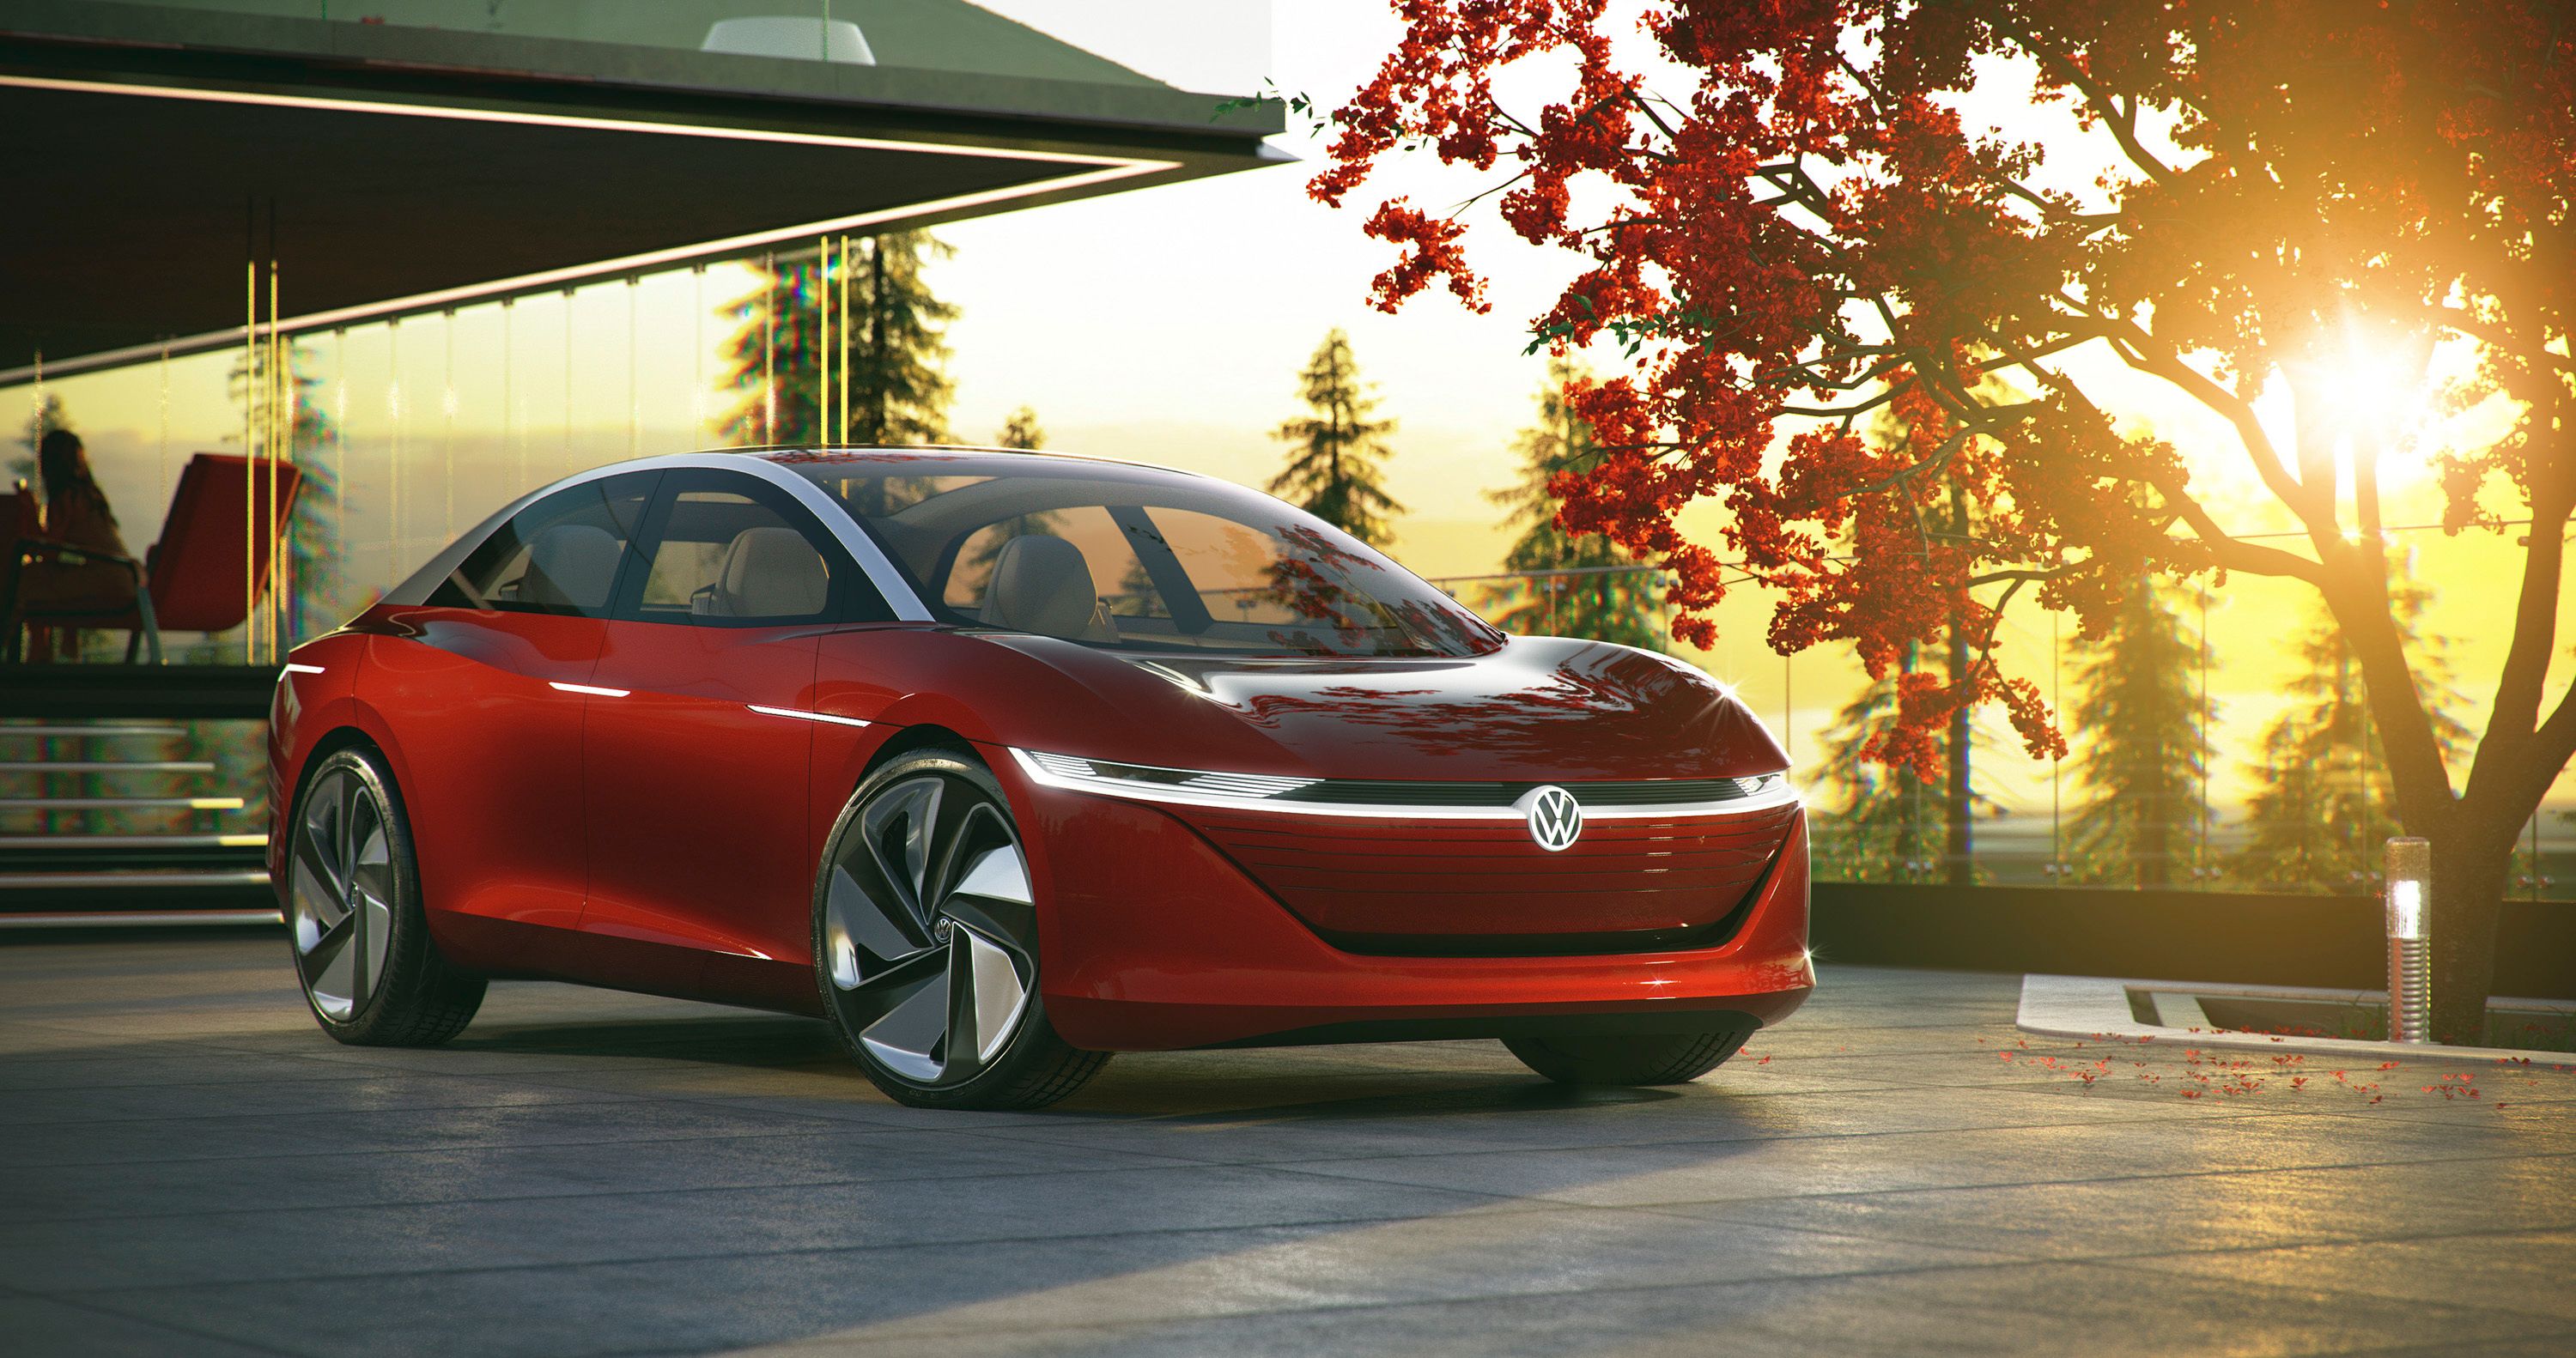 2018 The Volkswagen I.D. VIZZION Showcases Futuristic Technology with a Modern Look